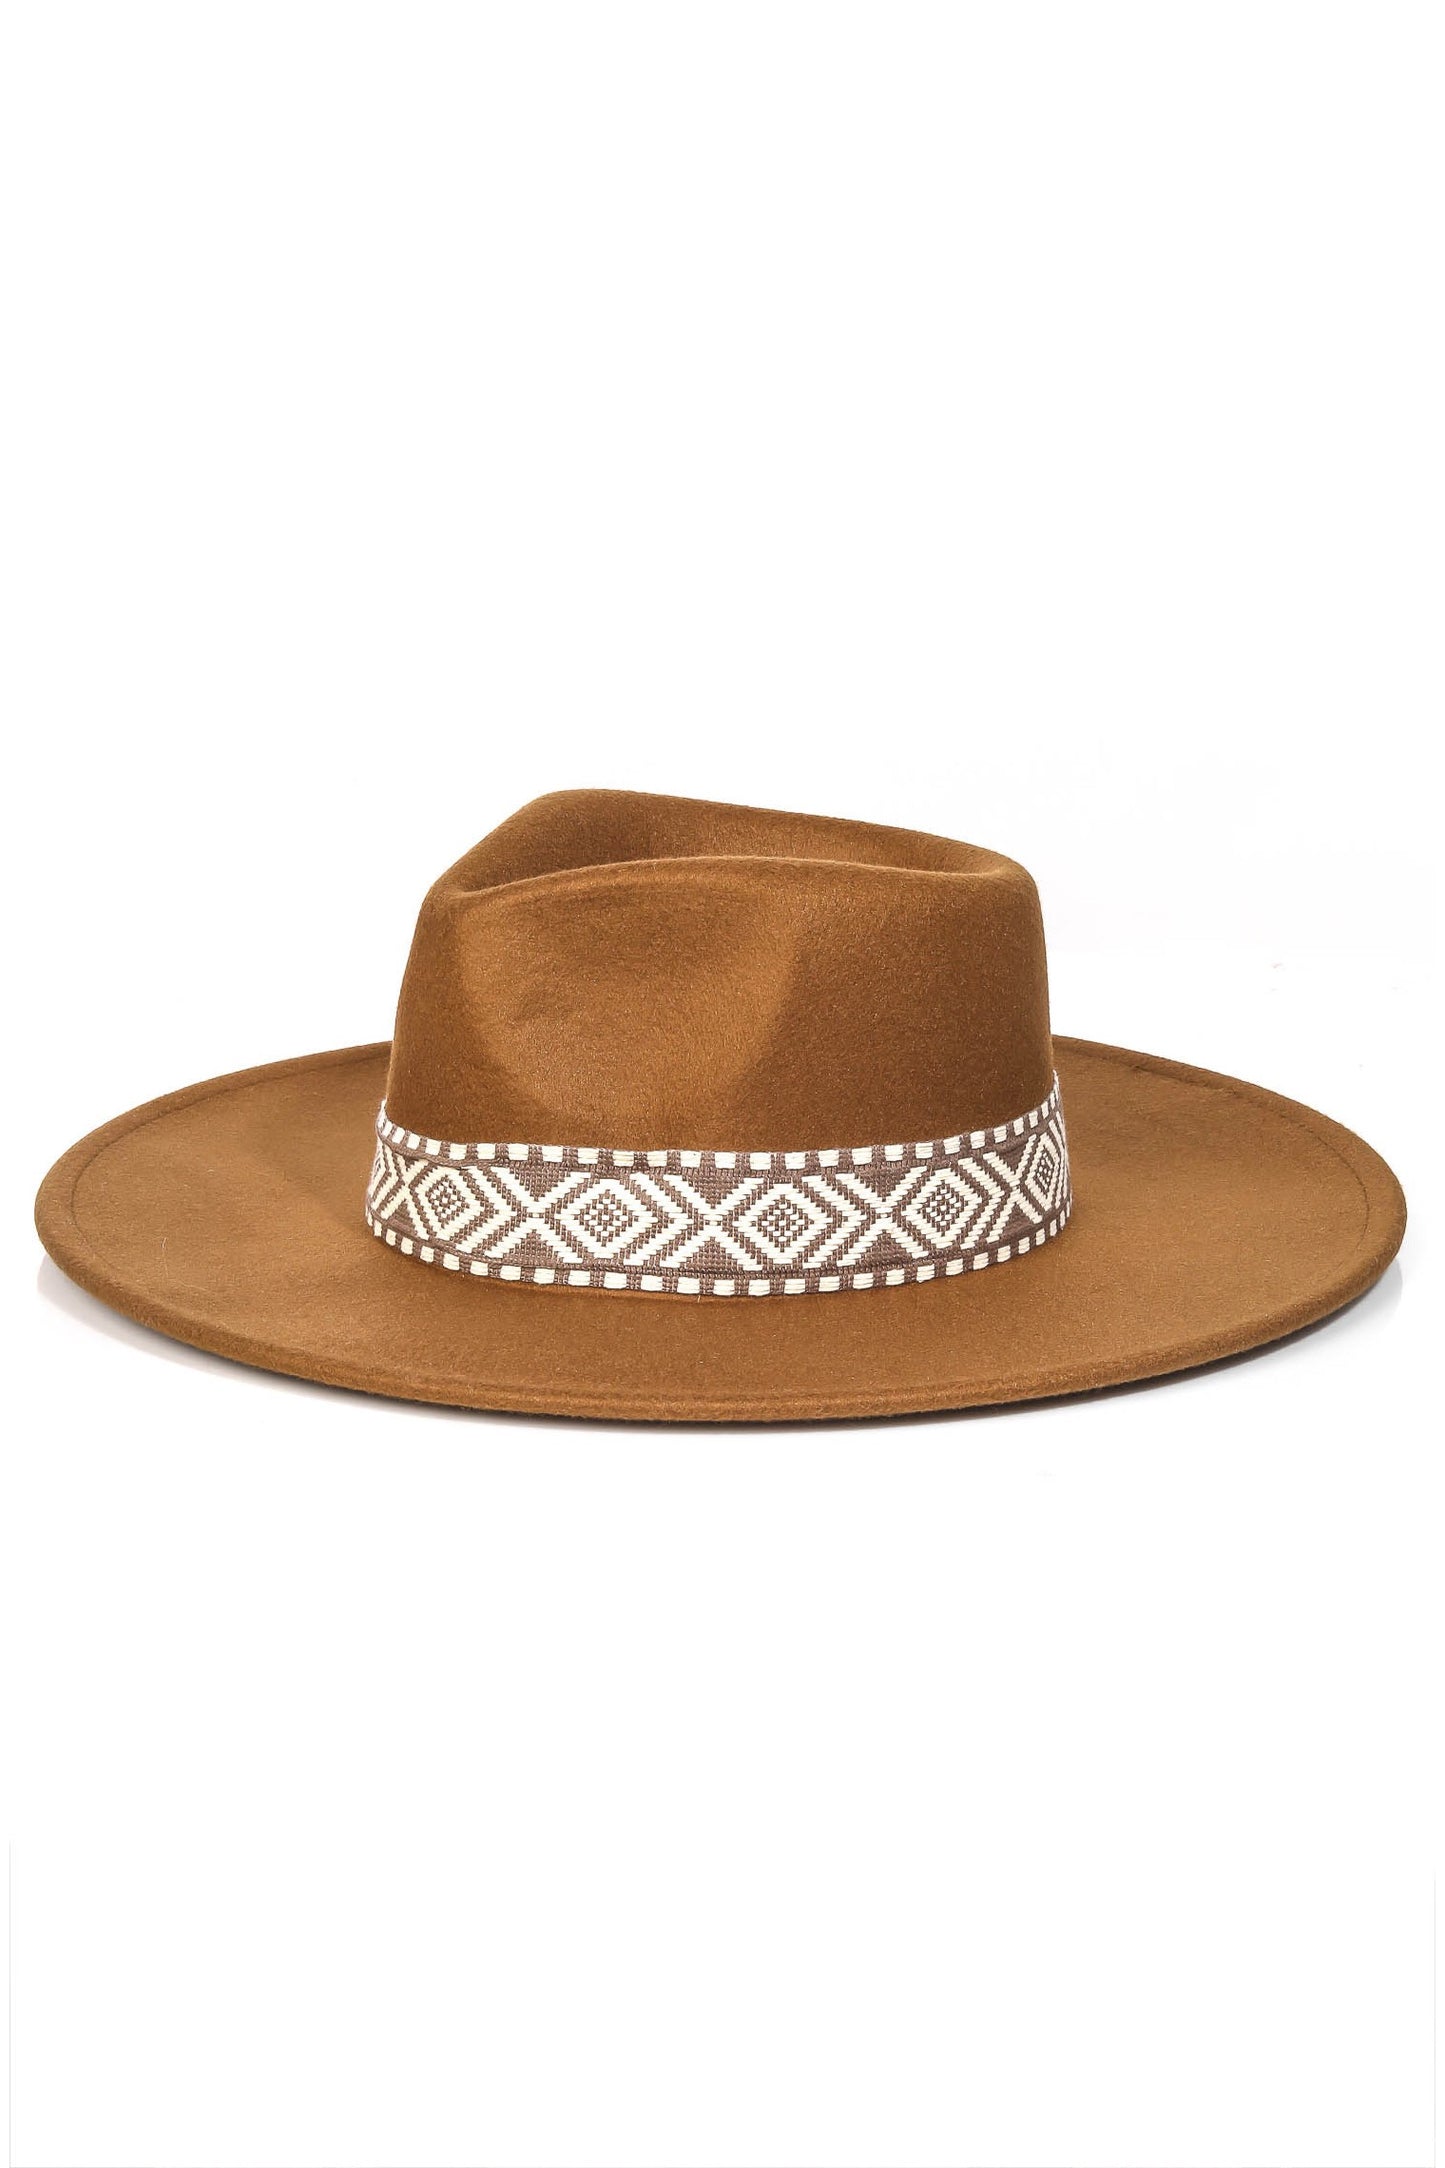 Boho Striped Hatband Fedora Hat - Brown-Hats-Fame Accessories-MMT8257-The Twisted Chandelier